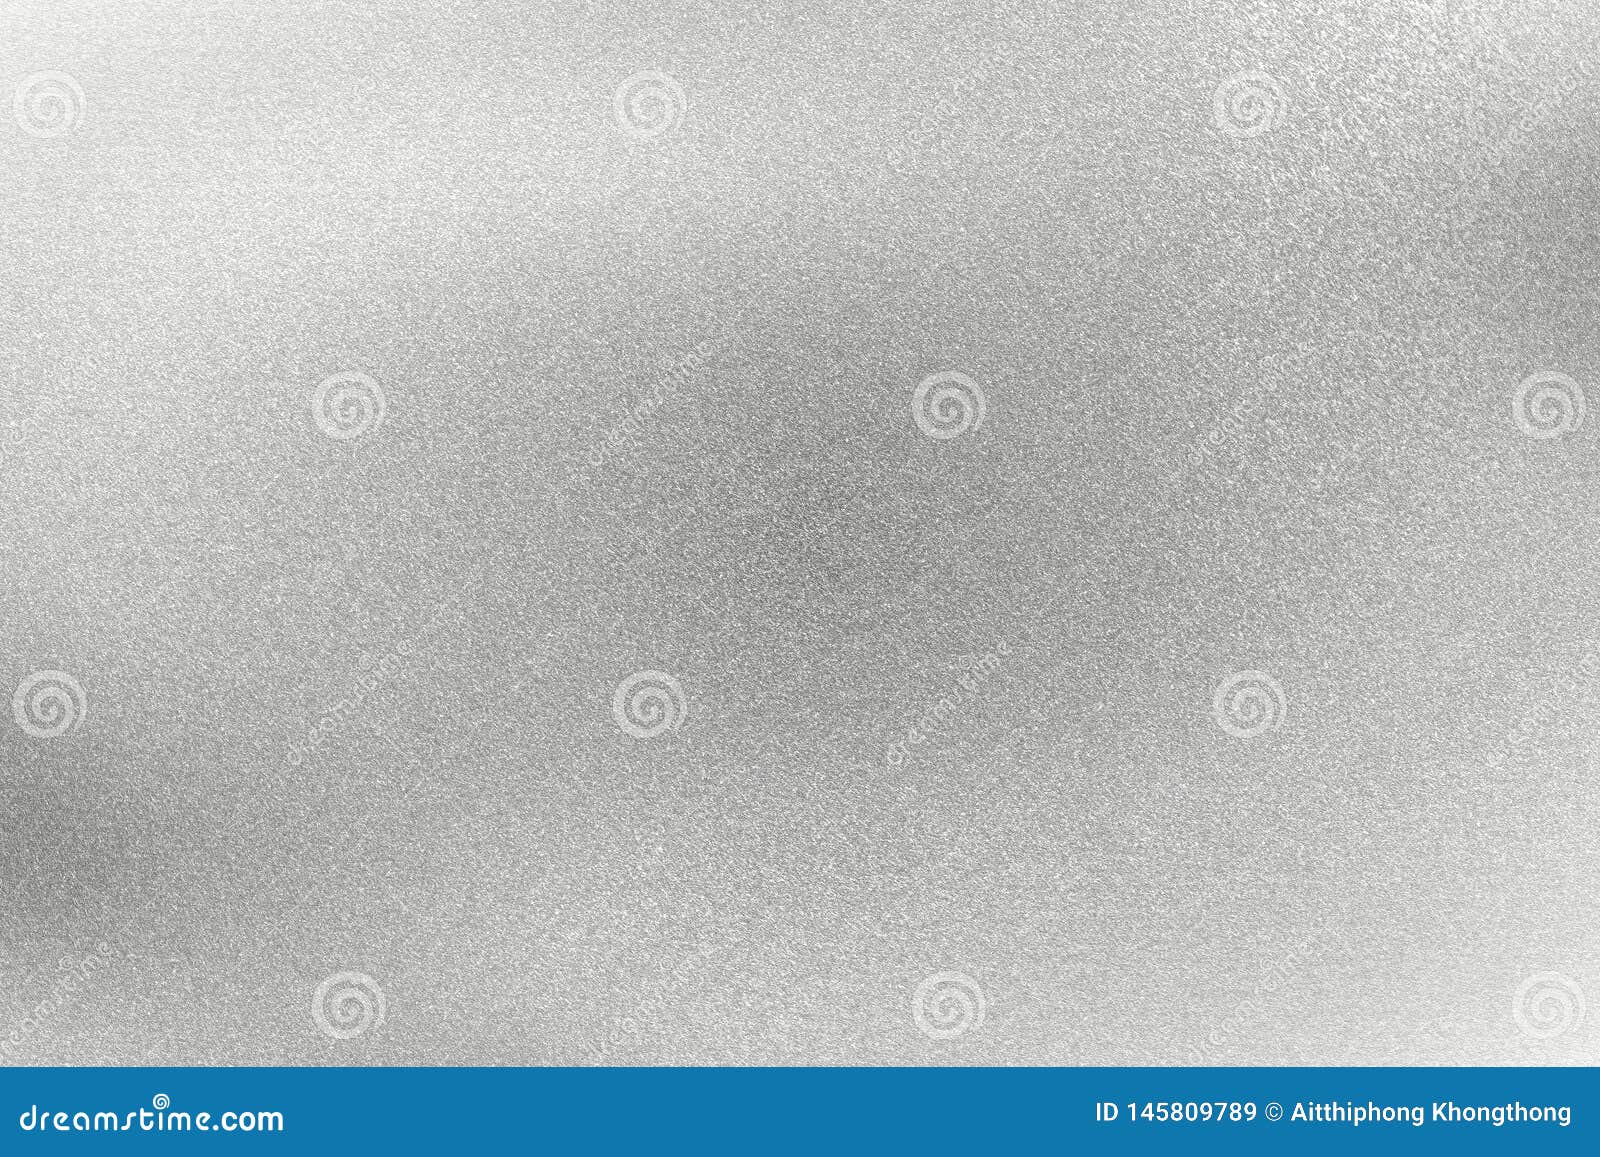 Abstract Texture Background, Shiny Brushed Silver Steel Wall Stock ...